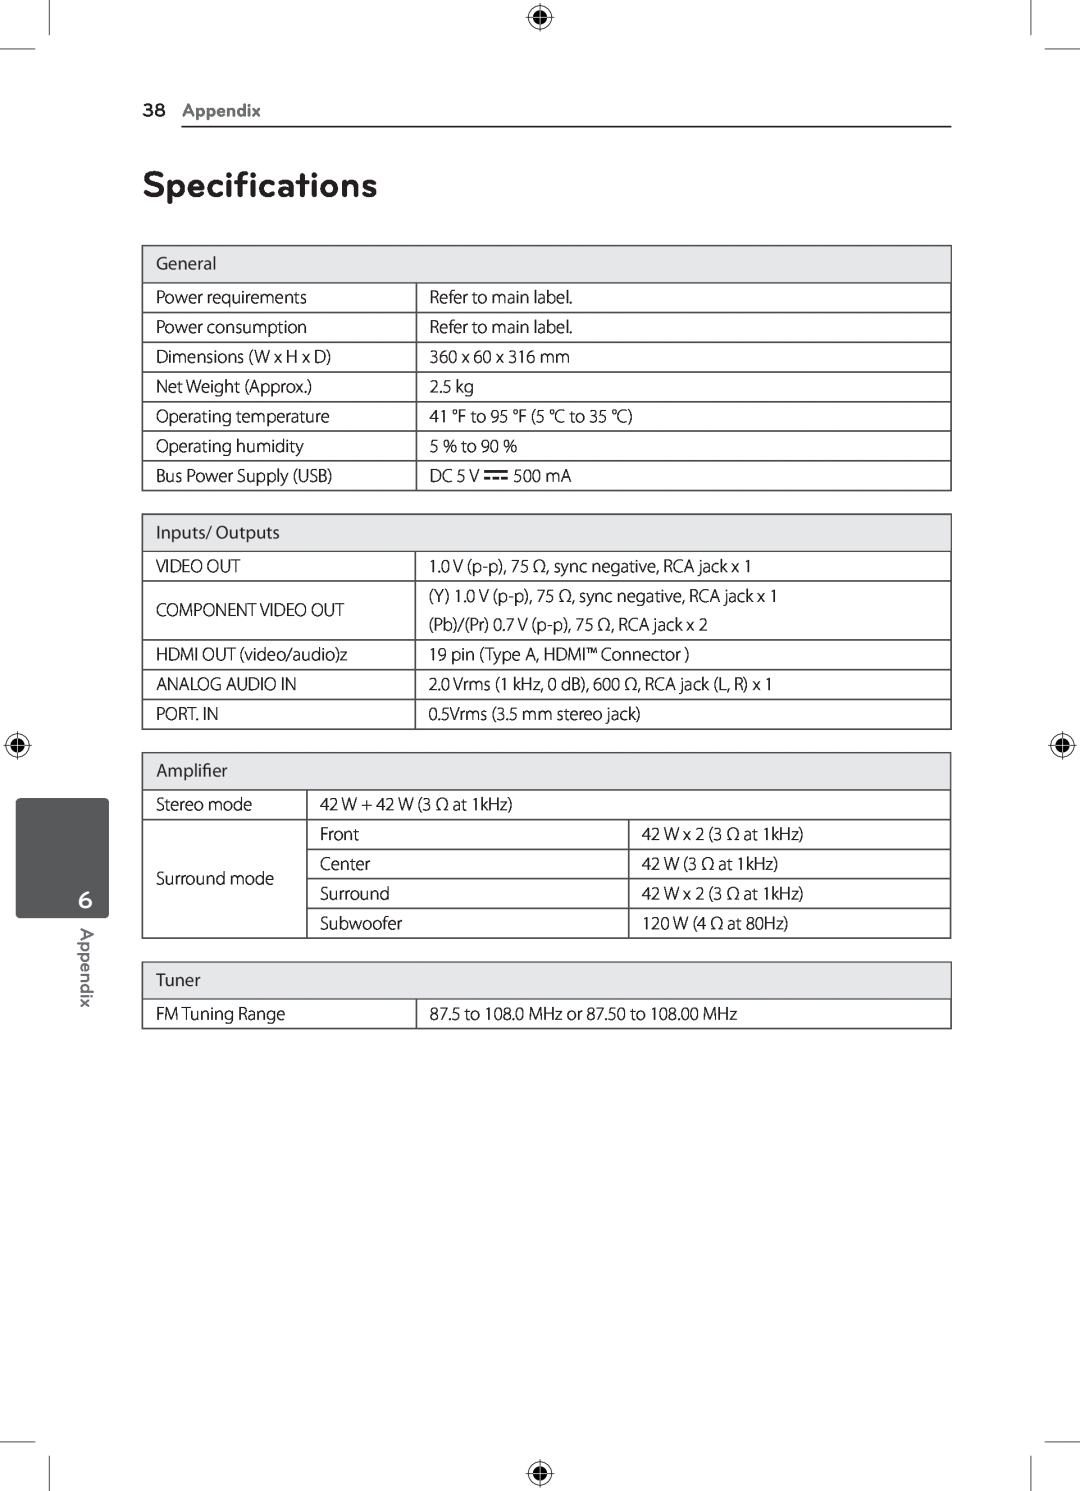 LG Electronics DH4220S owner manual Specifications, Appendix 